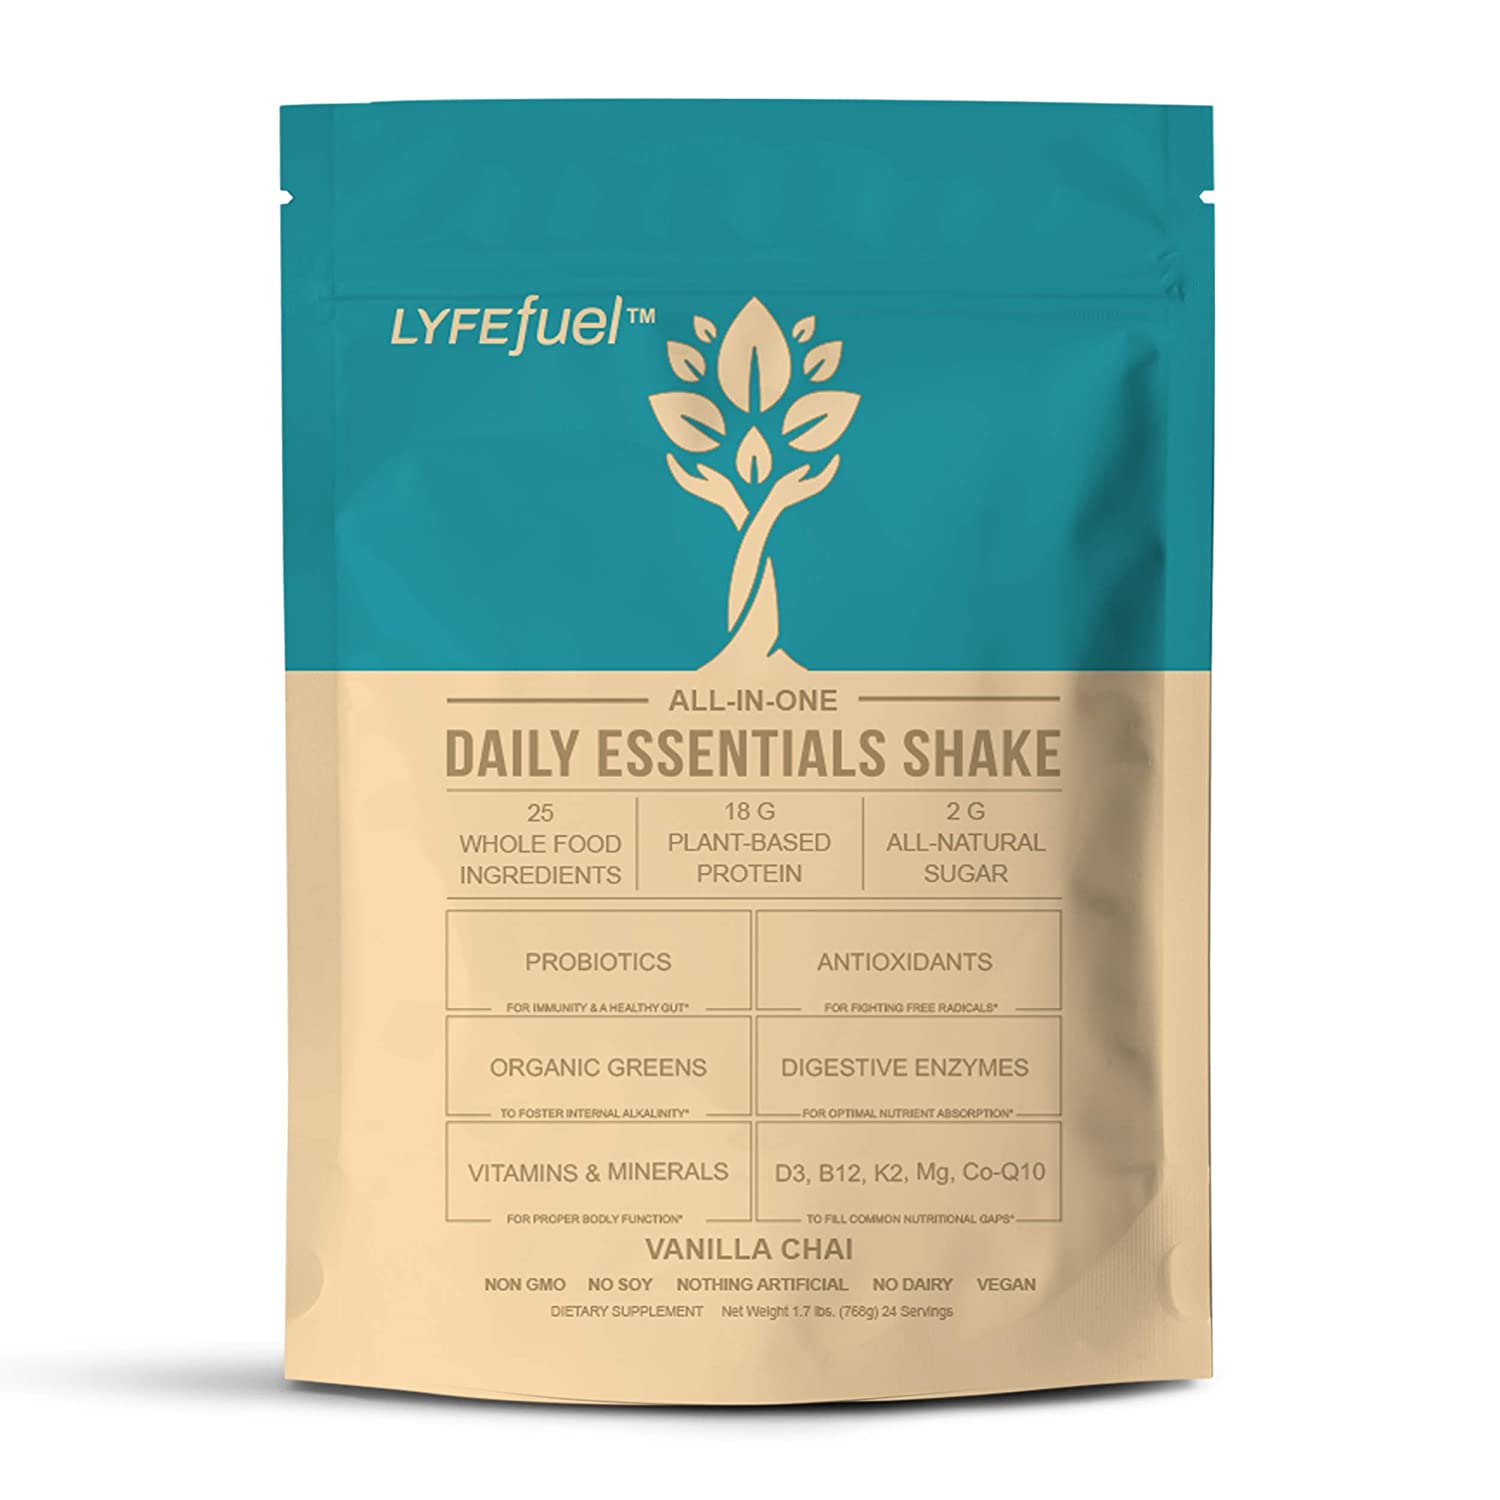 Lyfe Fuel gluten free & plant-based meal replacement Powder